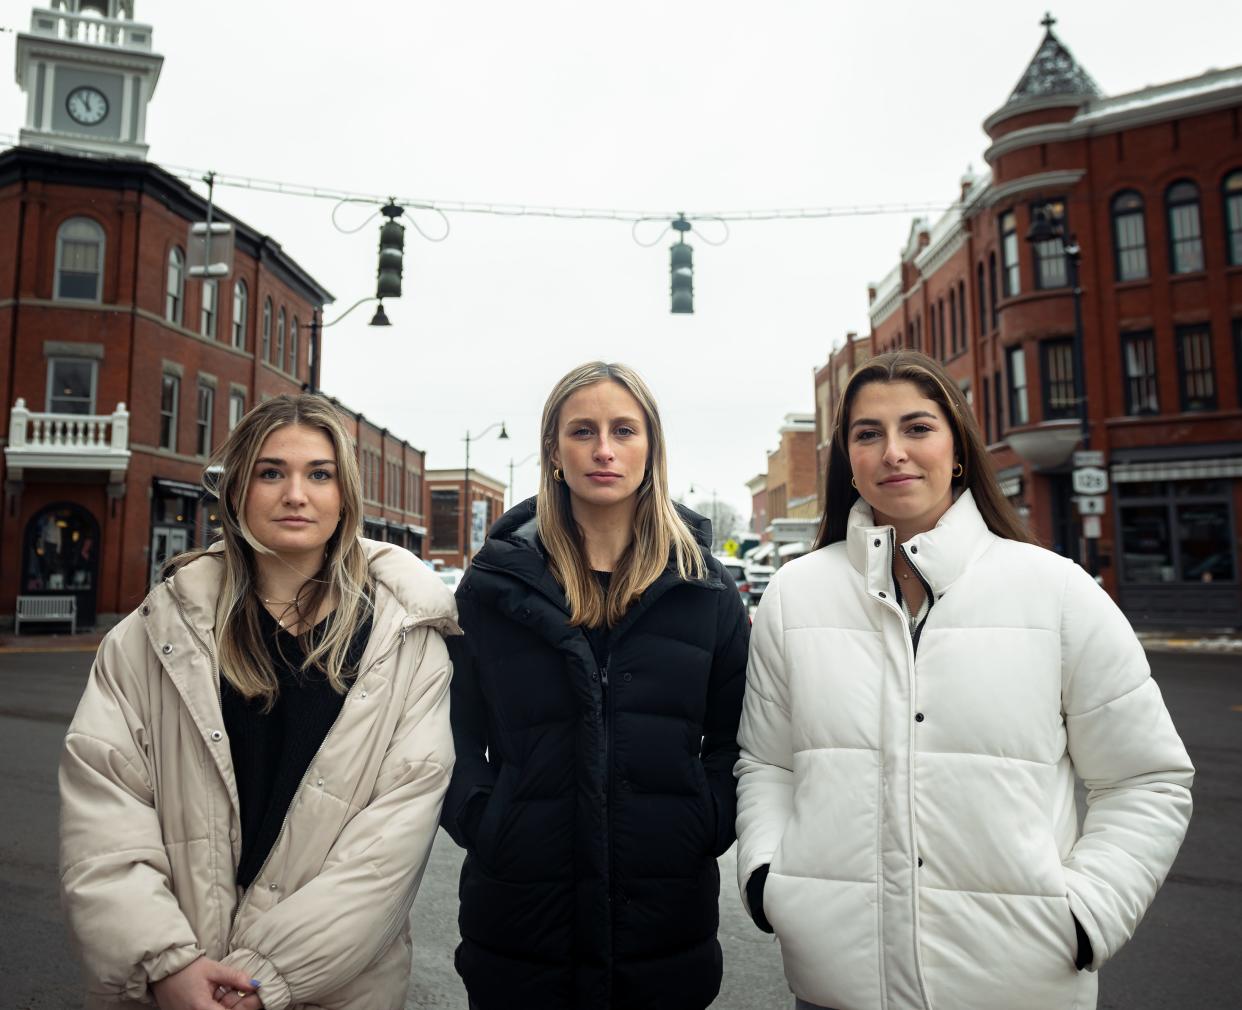 From left: Gracie Bowers, Eliza Soutter and Lauren Marandatt stand at the corner of Broad Street and Madison Street in Hamilton, NY on Tuesday, January 24, 2023.